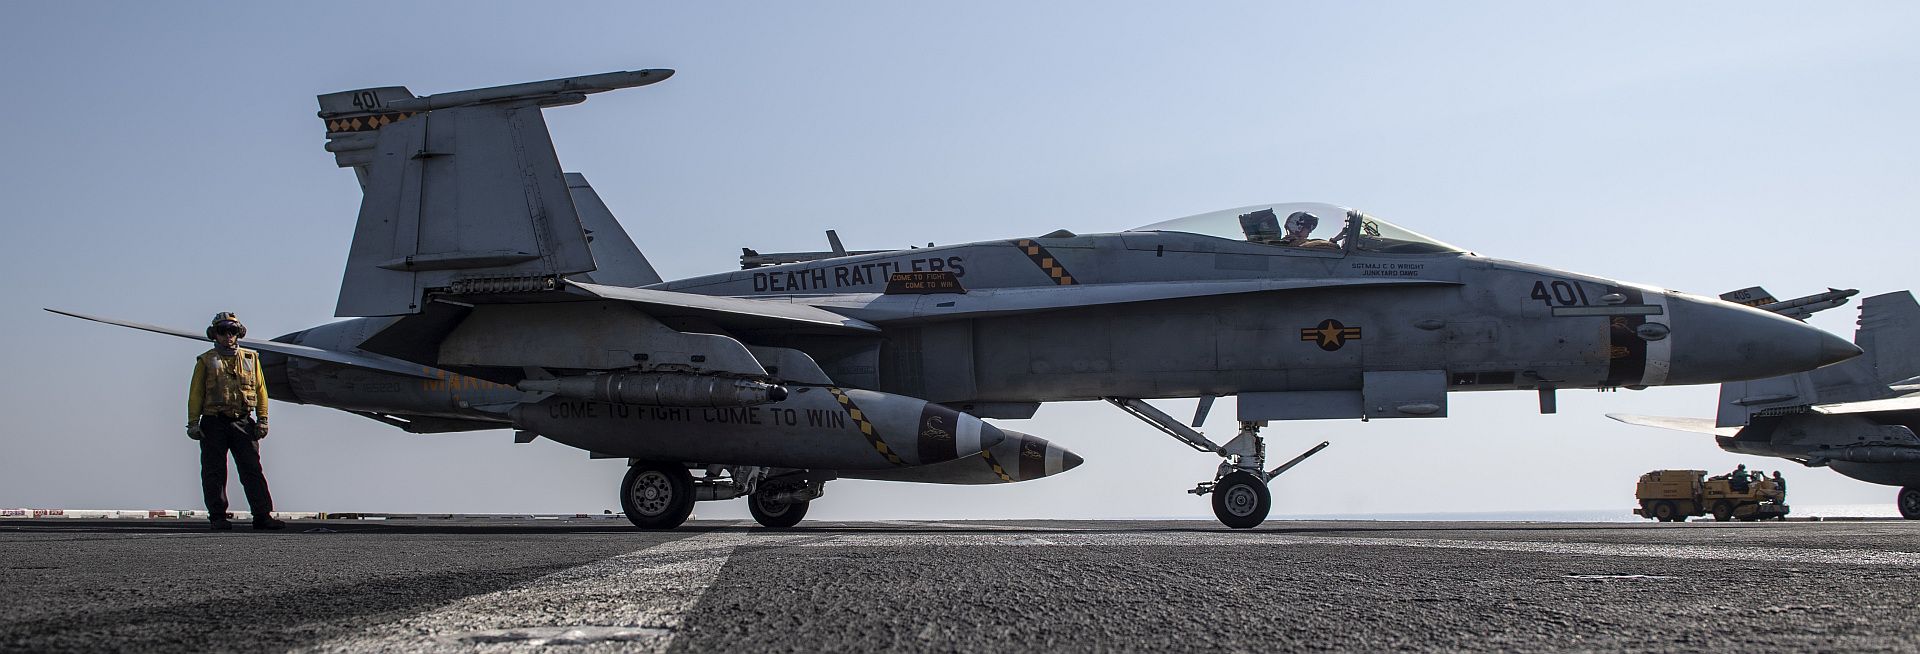 FA 18C Hornet From The Death Rattlers Of Marine Fighter Attack Squadron VMFA 323 Queues For Launch On The Flight Deck Of The Aircraft Carrier USS Nimitz